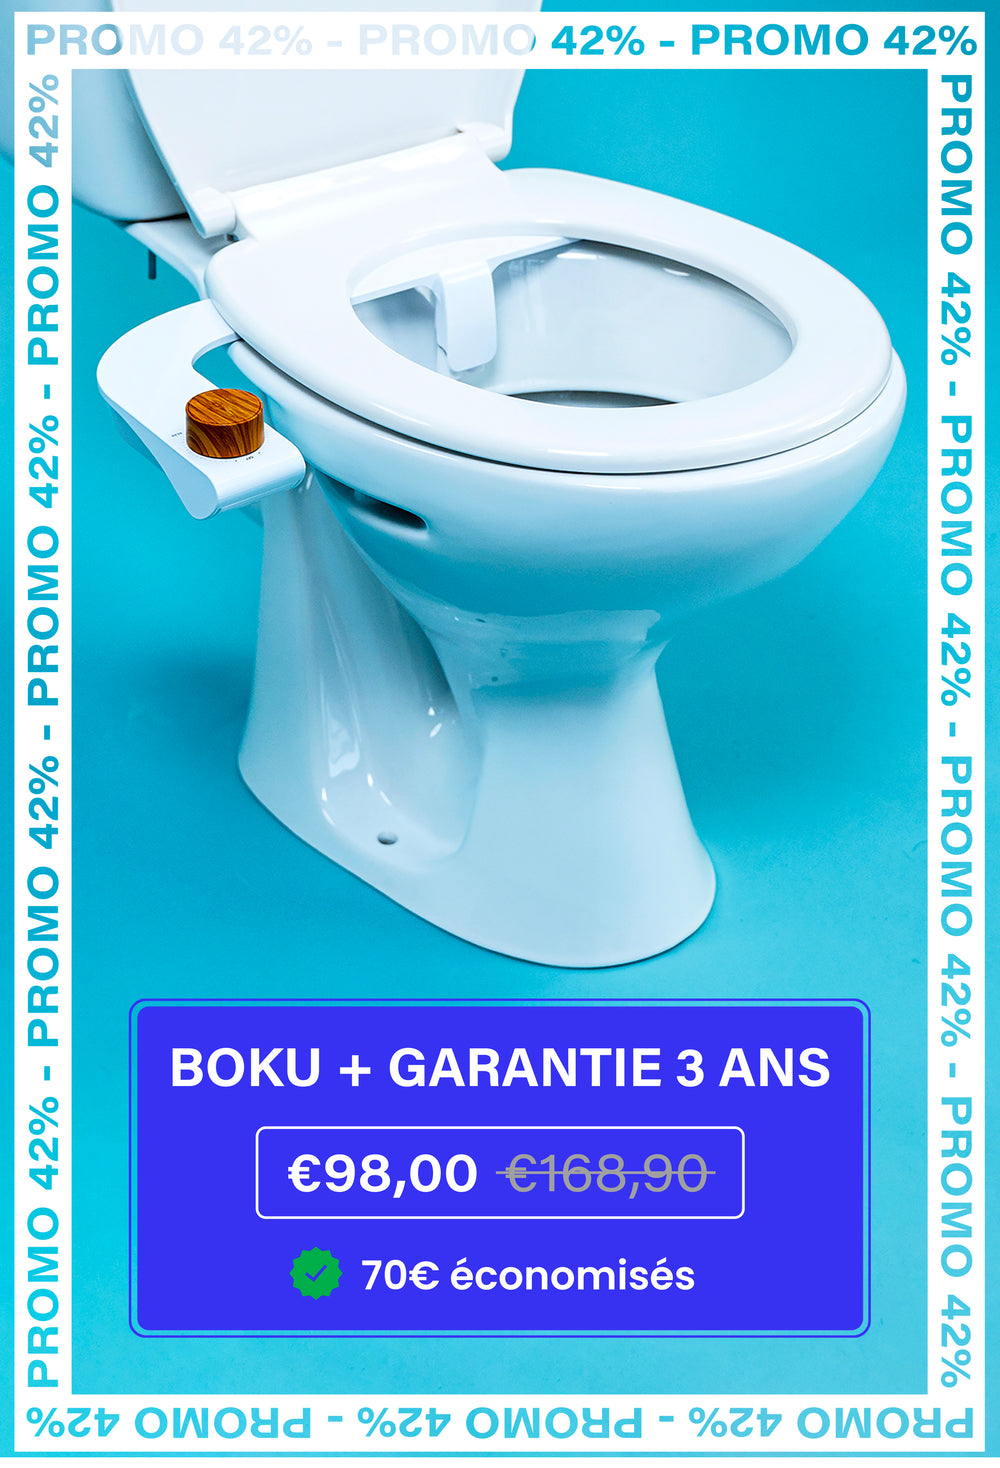 WC Boku, Toilettes Japonaises Made in France